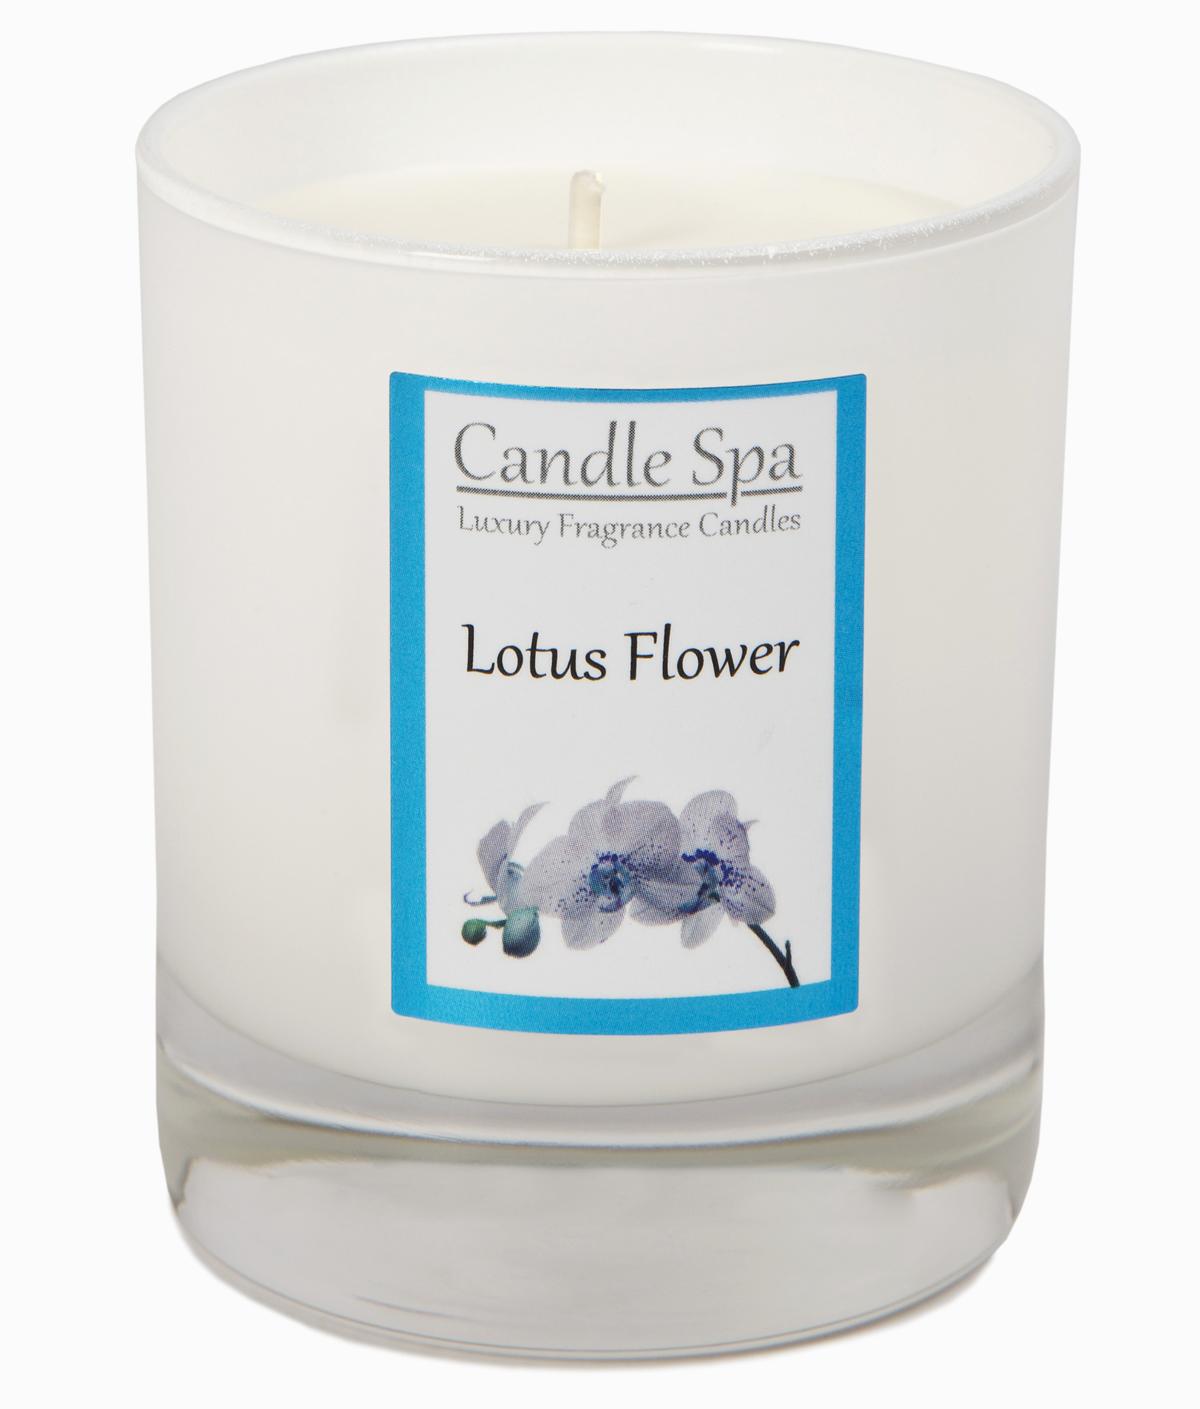 Candle Spa Luxury Candle in 20cl Tumbler - Lotus Flower